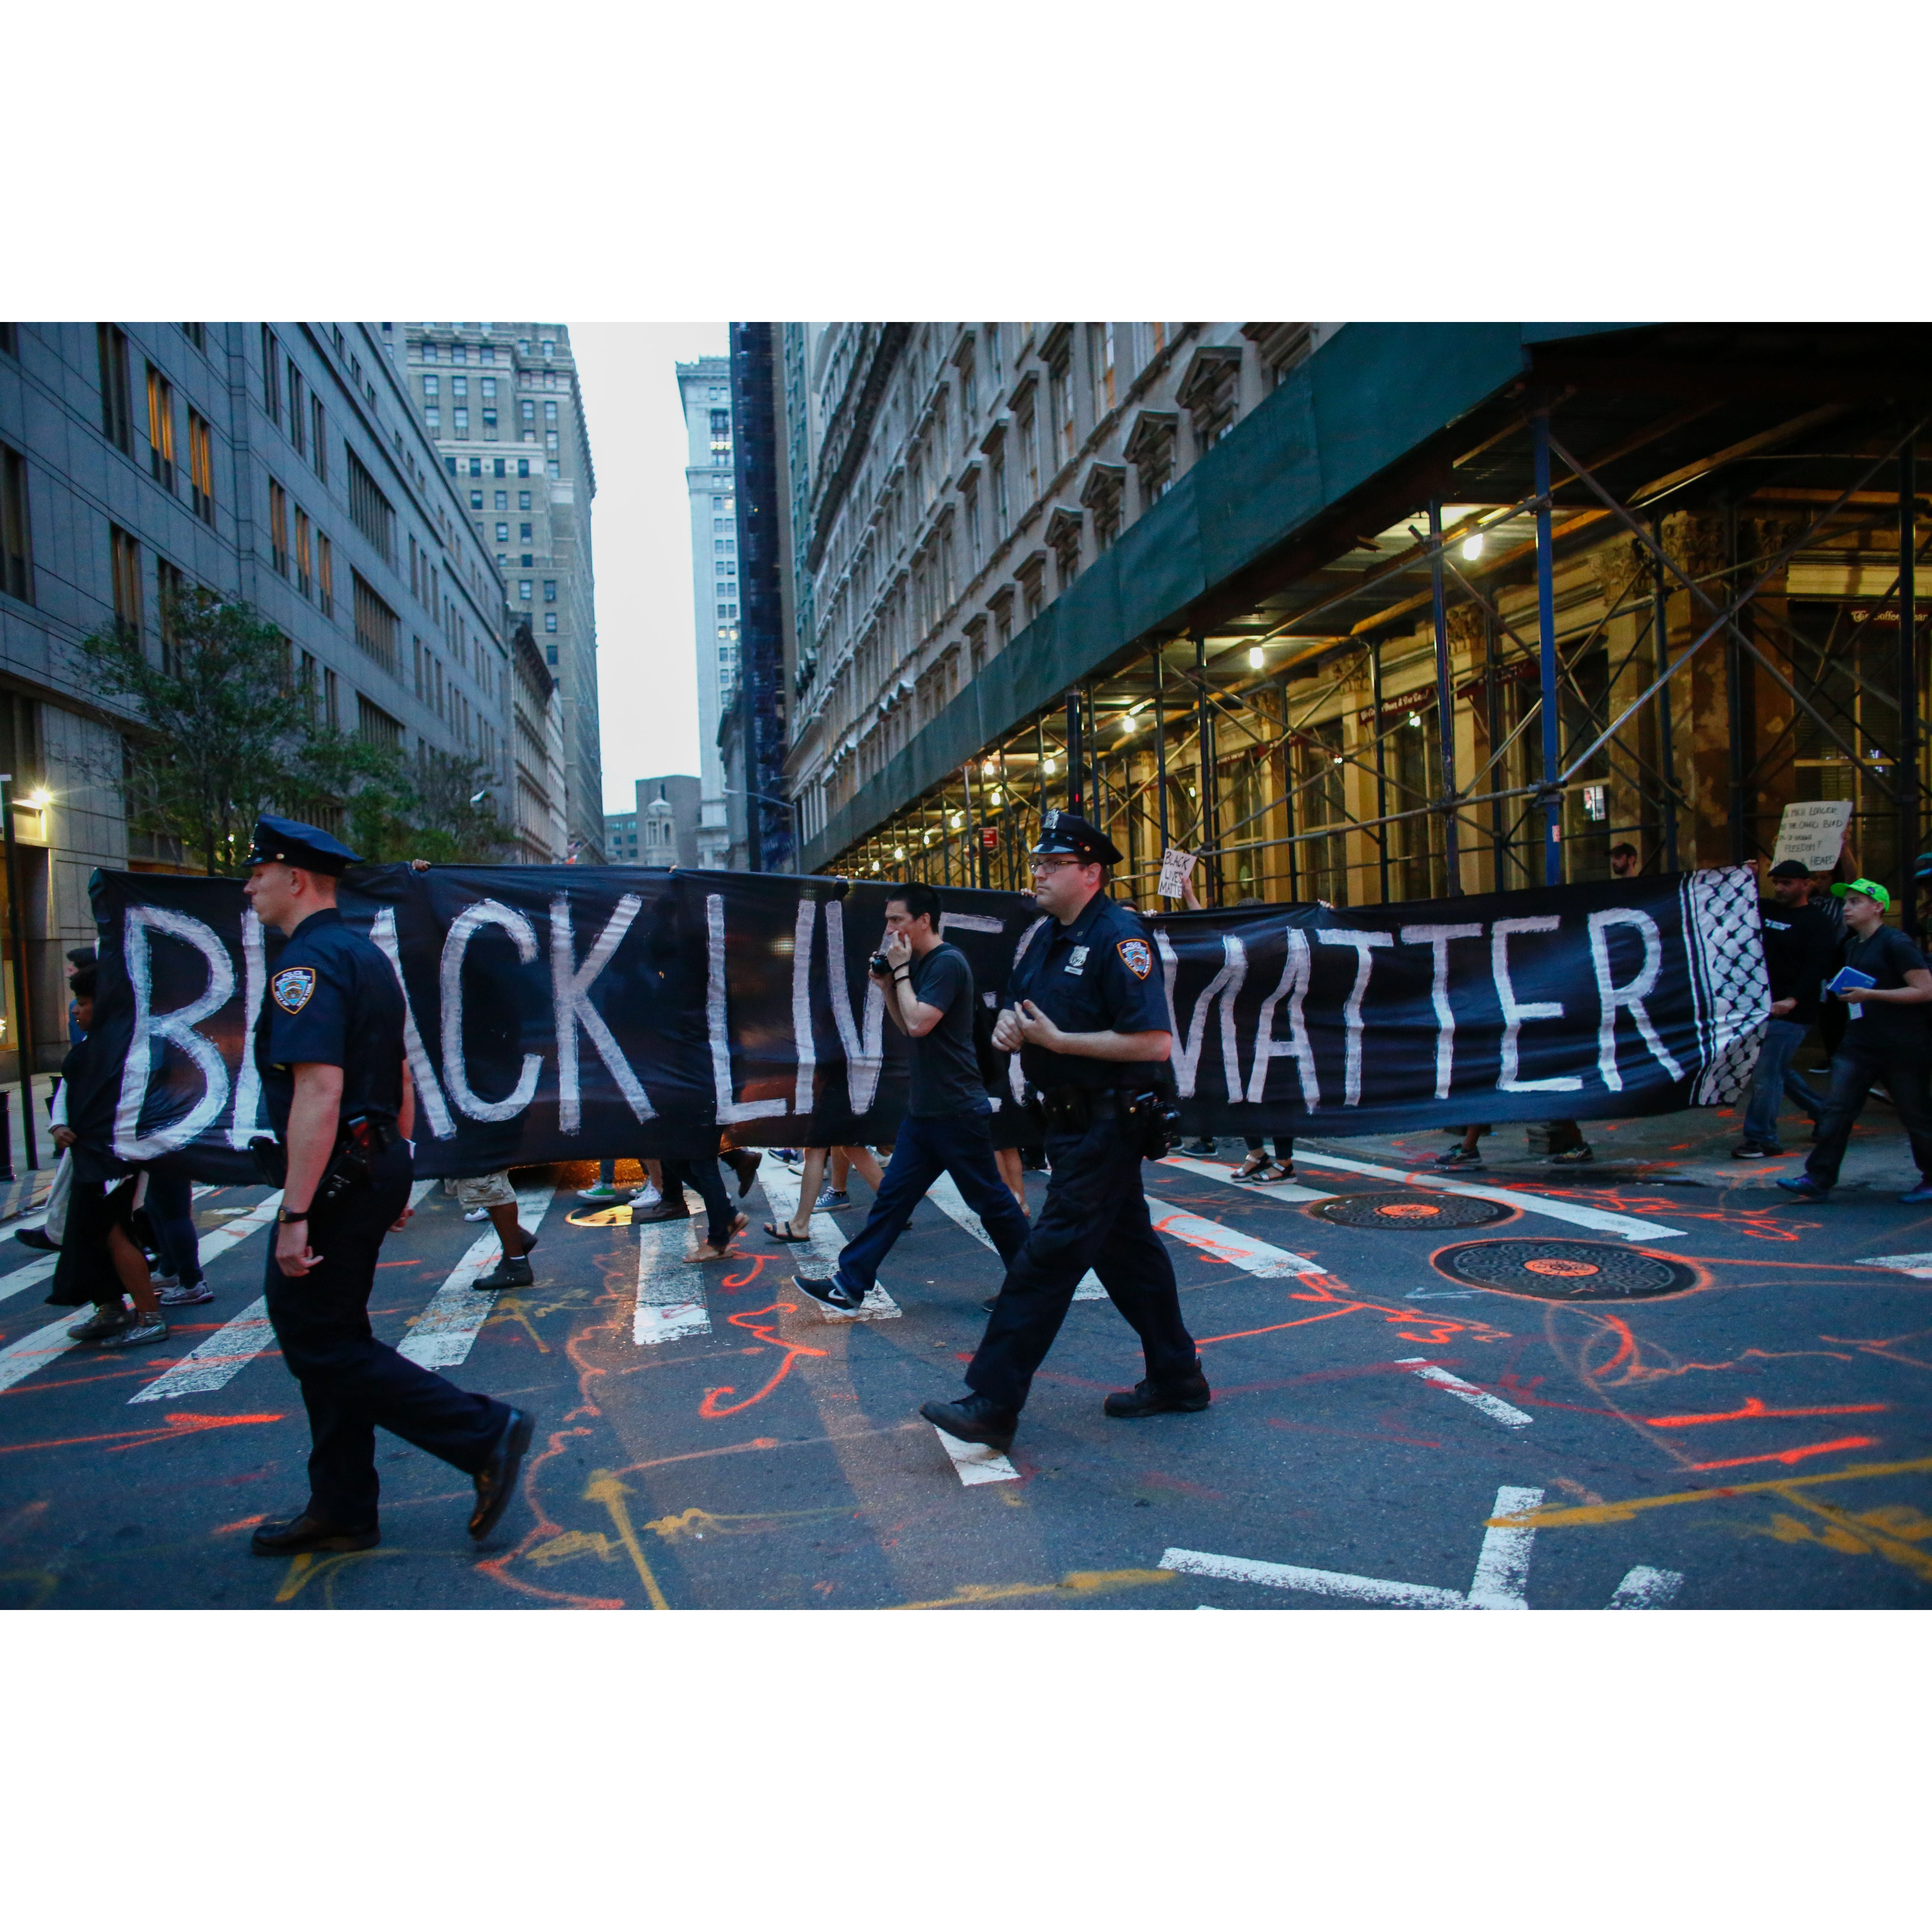 #BlackLivesMatter: The Most Powerful Images of Protests Against Police Brutality From Around the Country